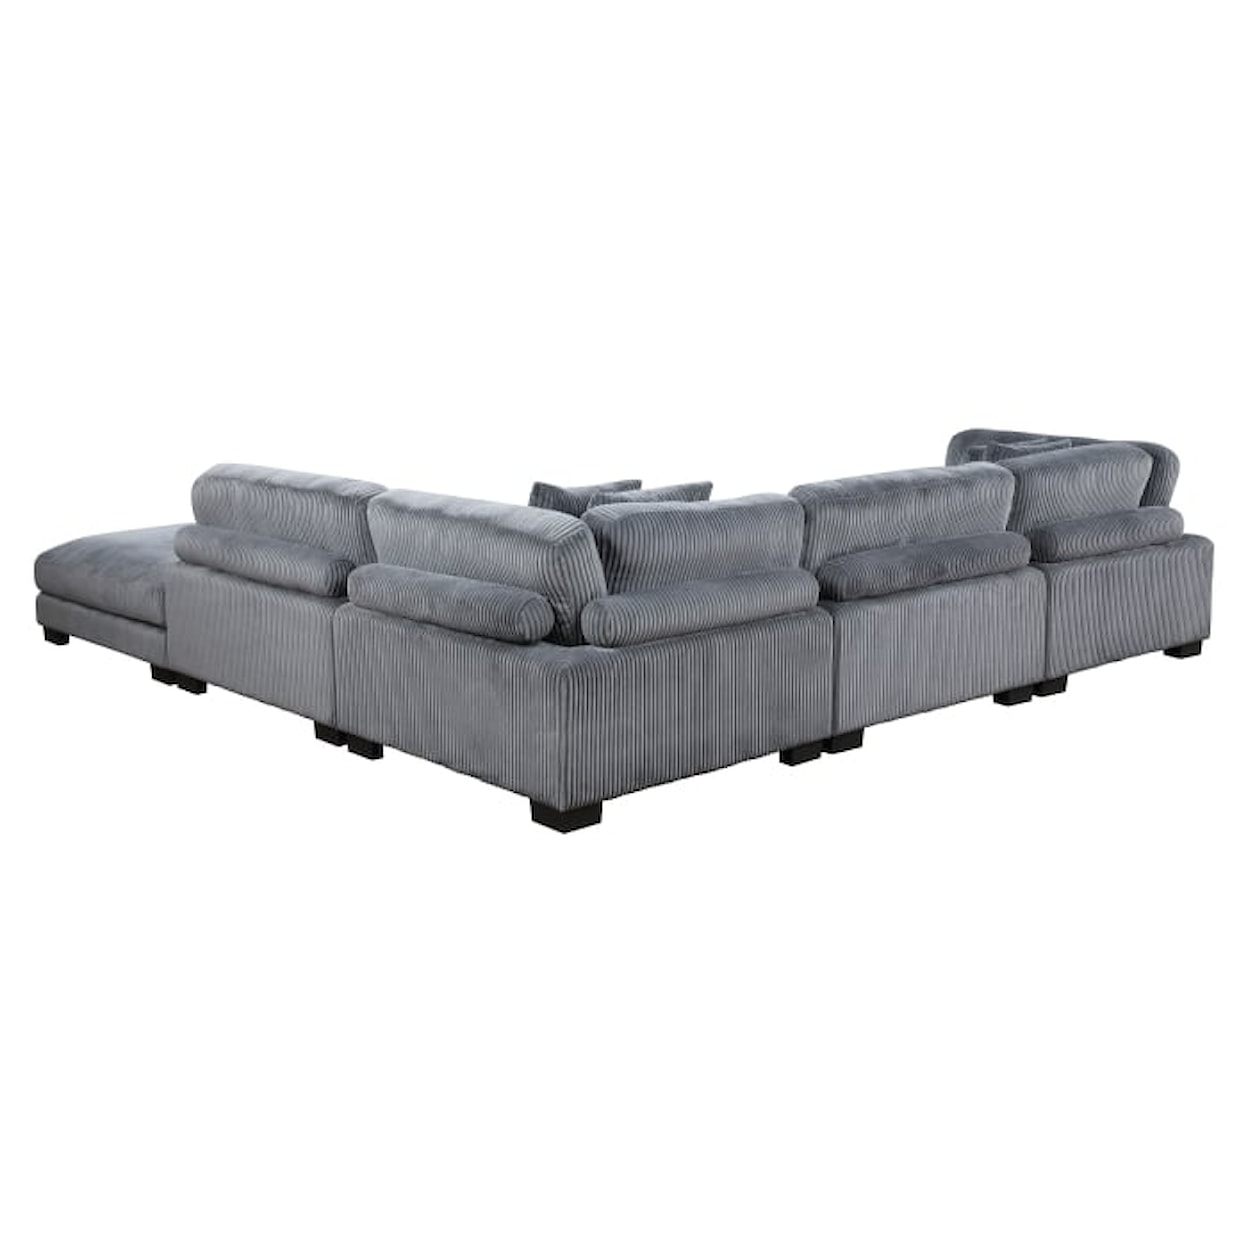 Homelegance Traverse 5-Piece Modular Sectional with Ottoman